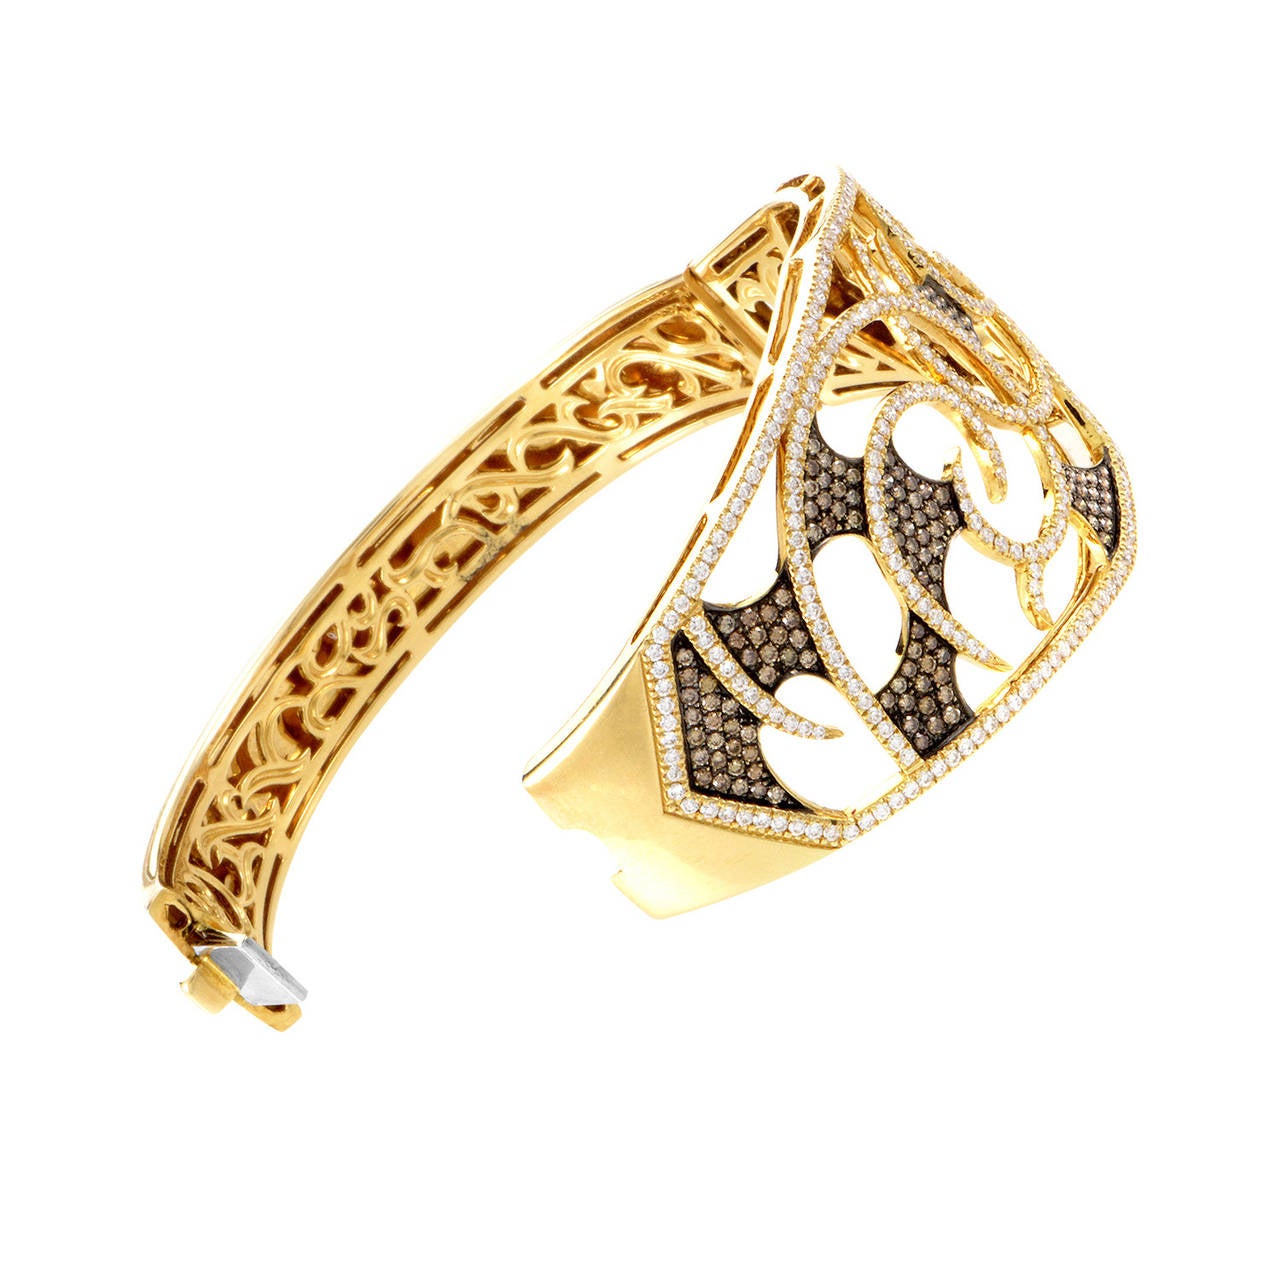 Golden swirls accented with radiant diamonds are the hallmarks of this Stephen Webster design. The bracelet is made of 18K yellow gold and is set with 3.39 carats of brown and white diamonds.

Included Items: Manufacturer's Box
Diamond Carat